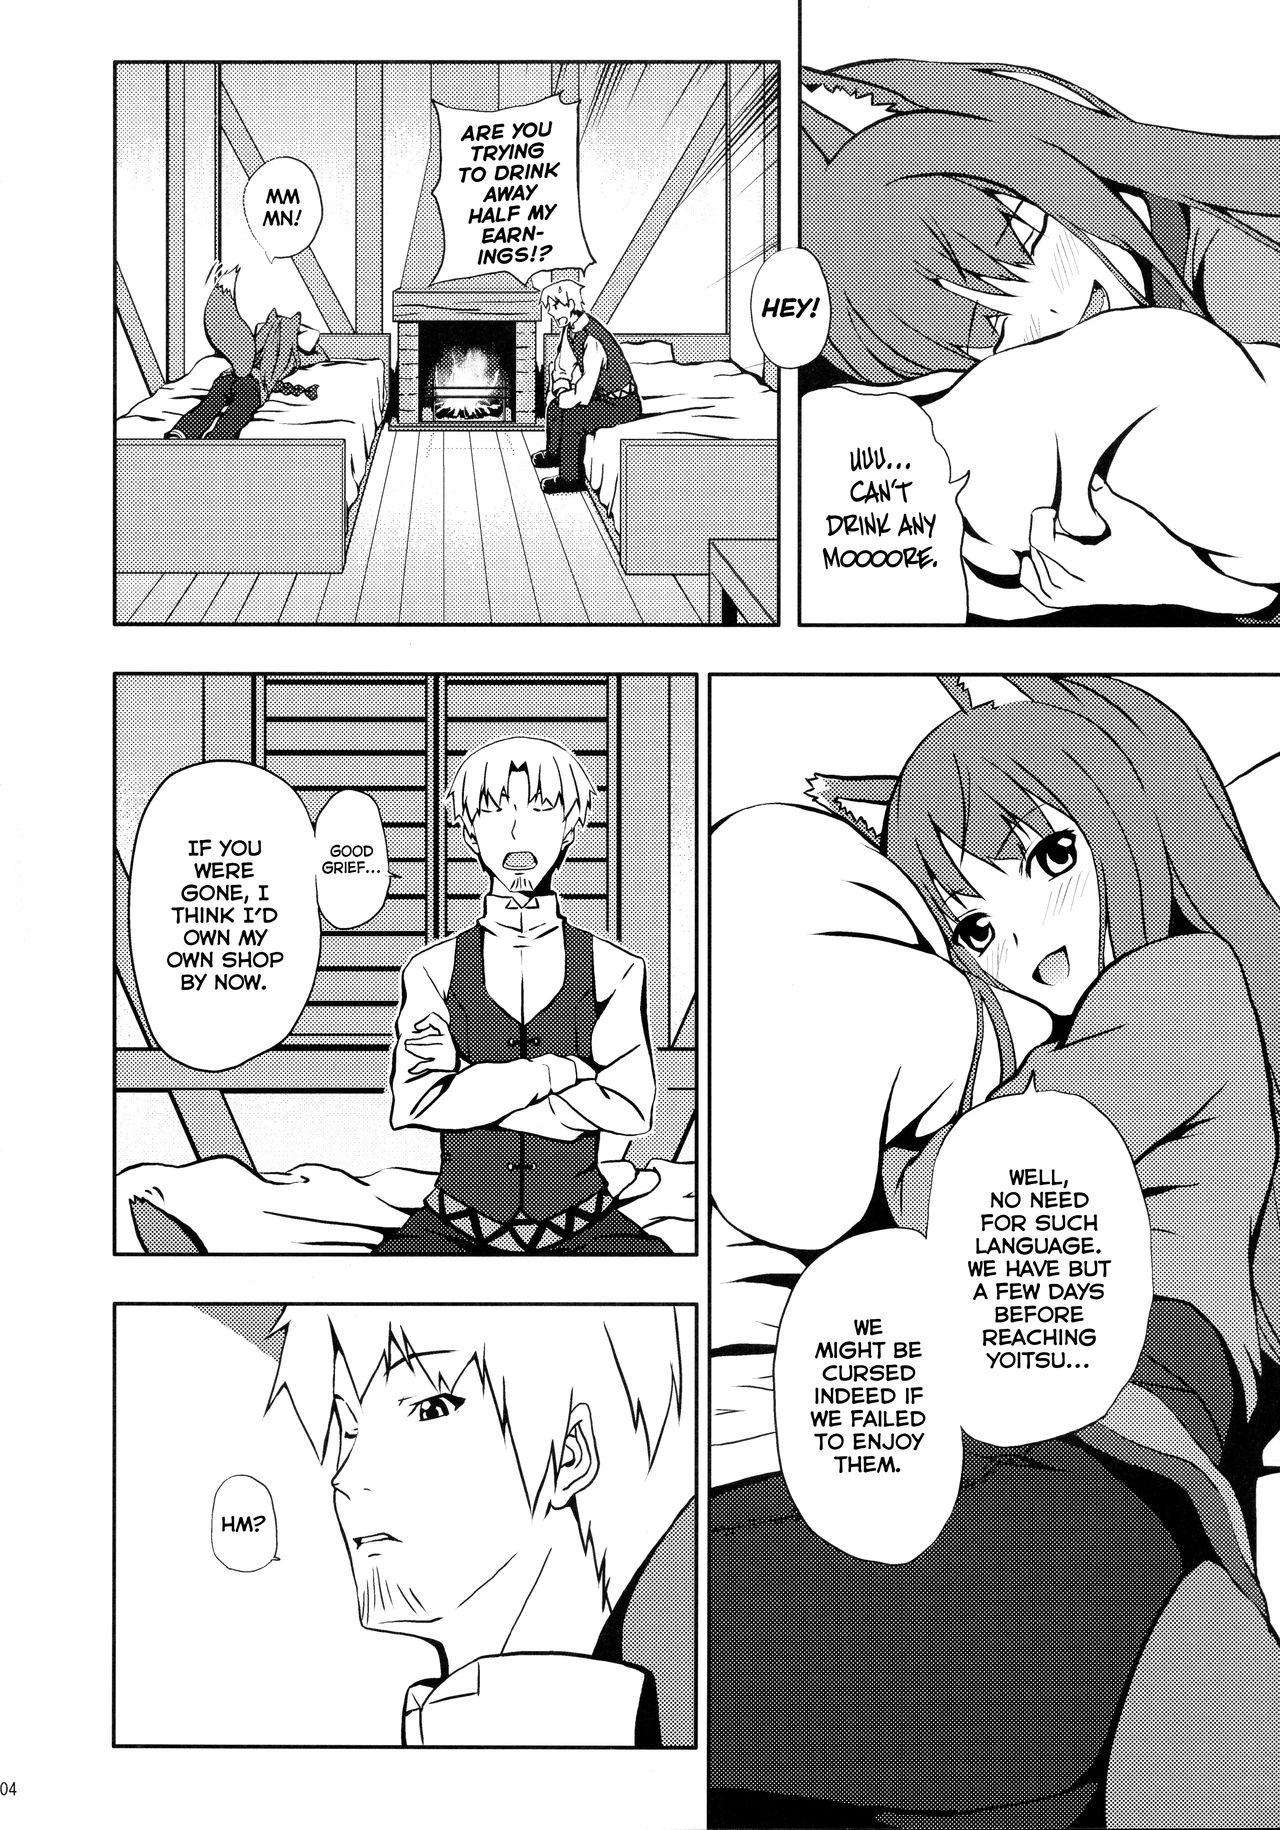 Rough Fucking Bitter Apple - Spice and wolf Tats - Page 4